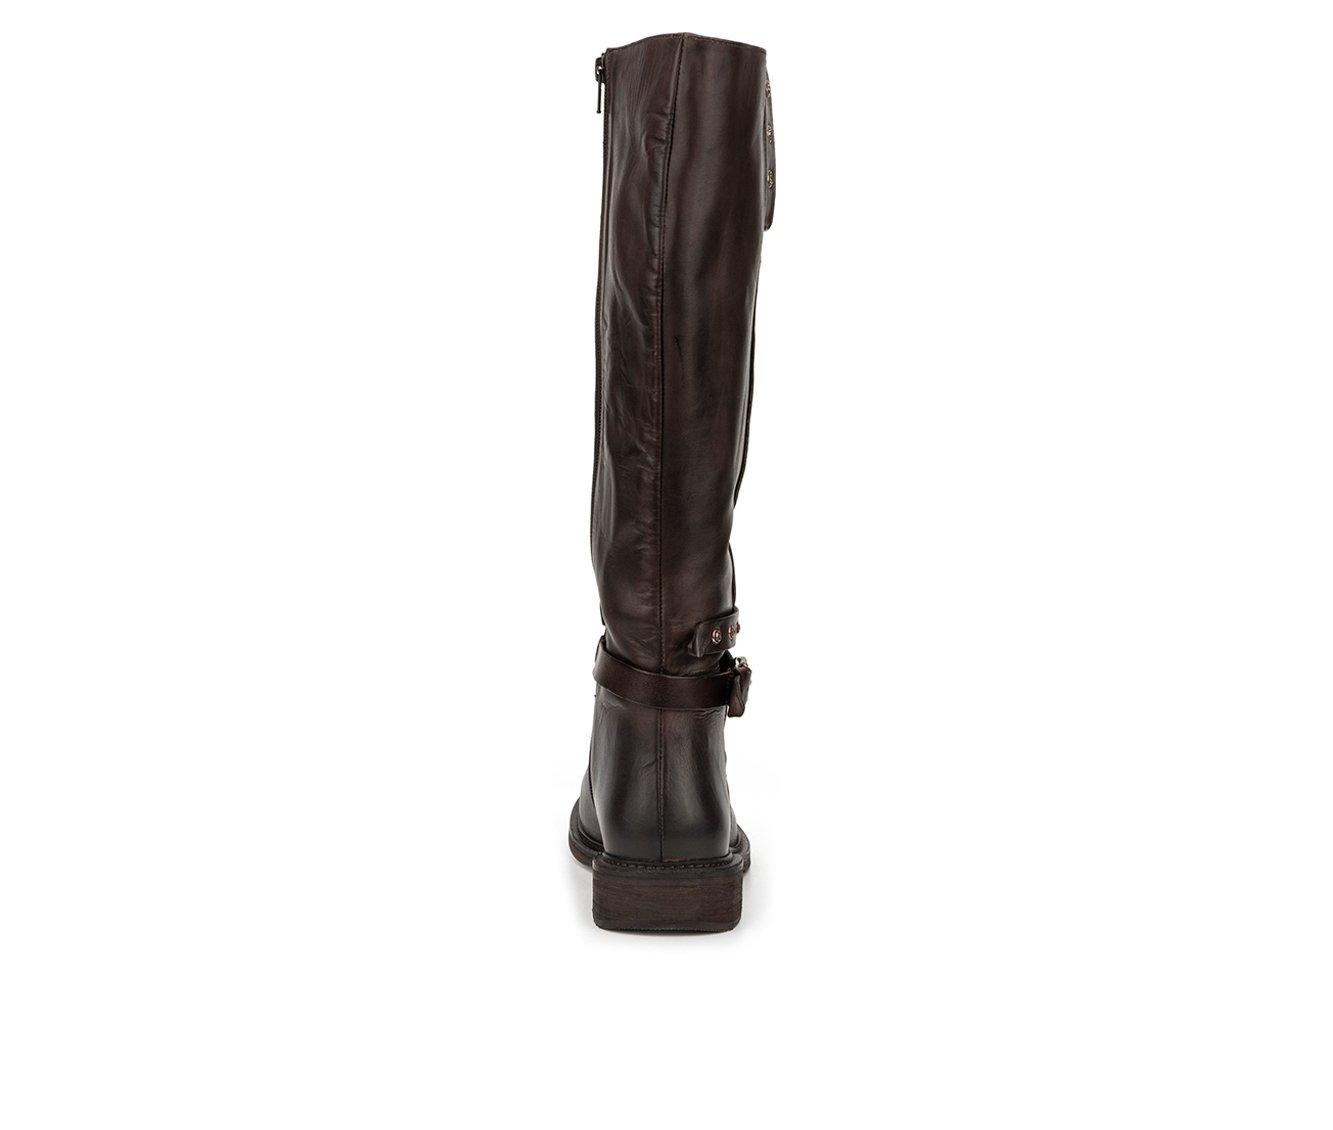 Vintage Foundry Co Reign Knee High Boots